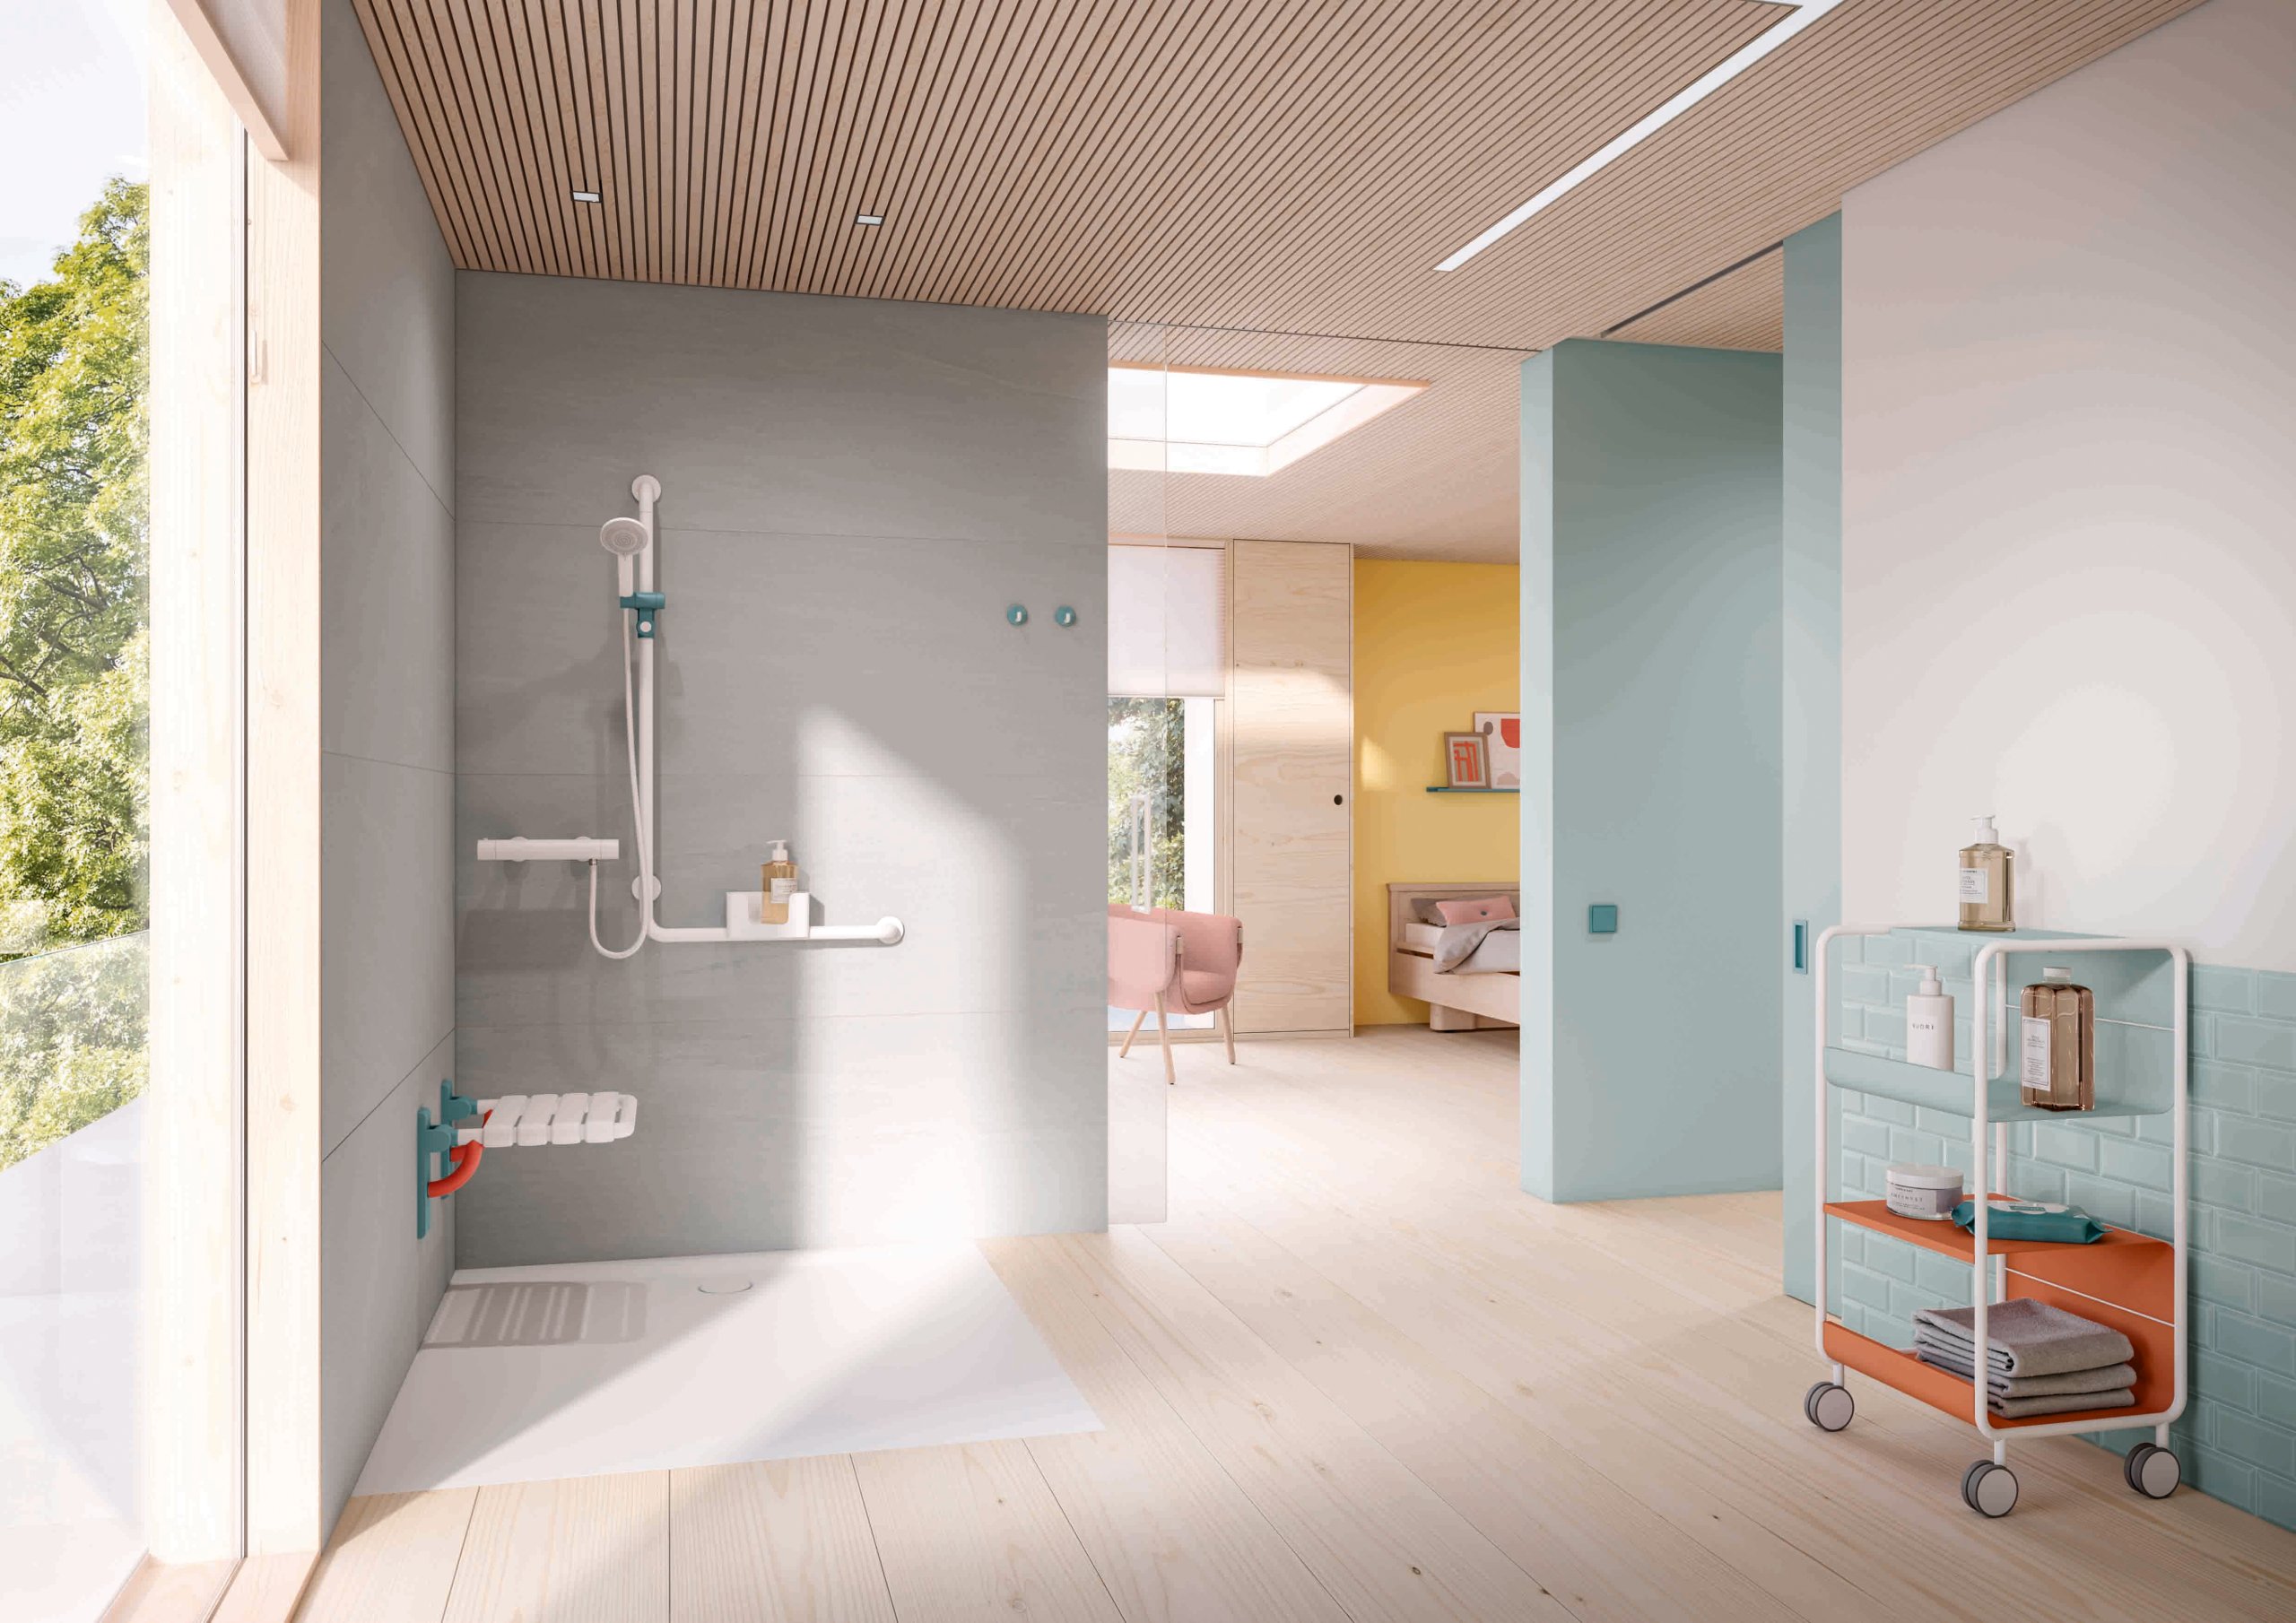 Barrier-free shower area in a patient room